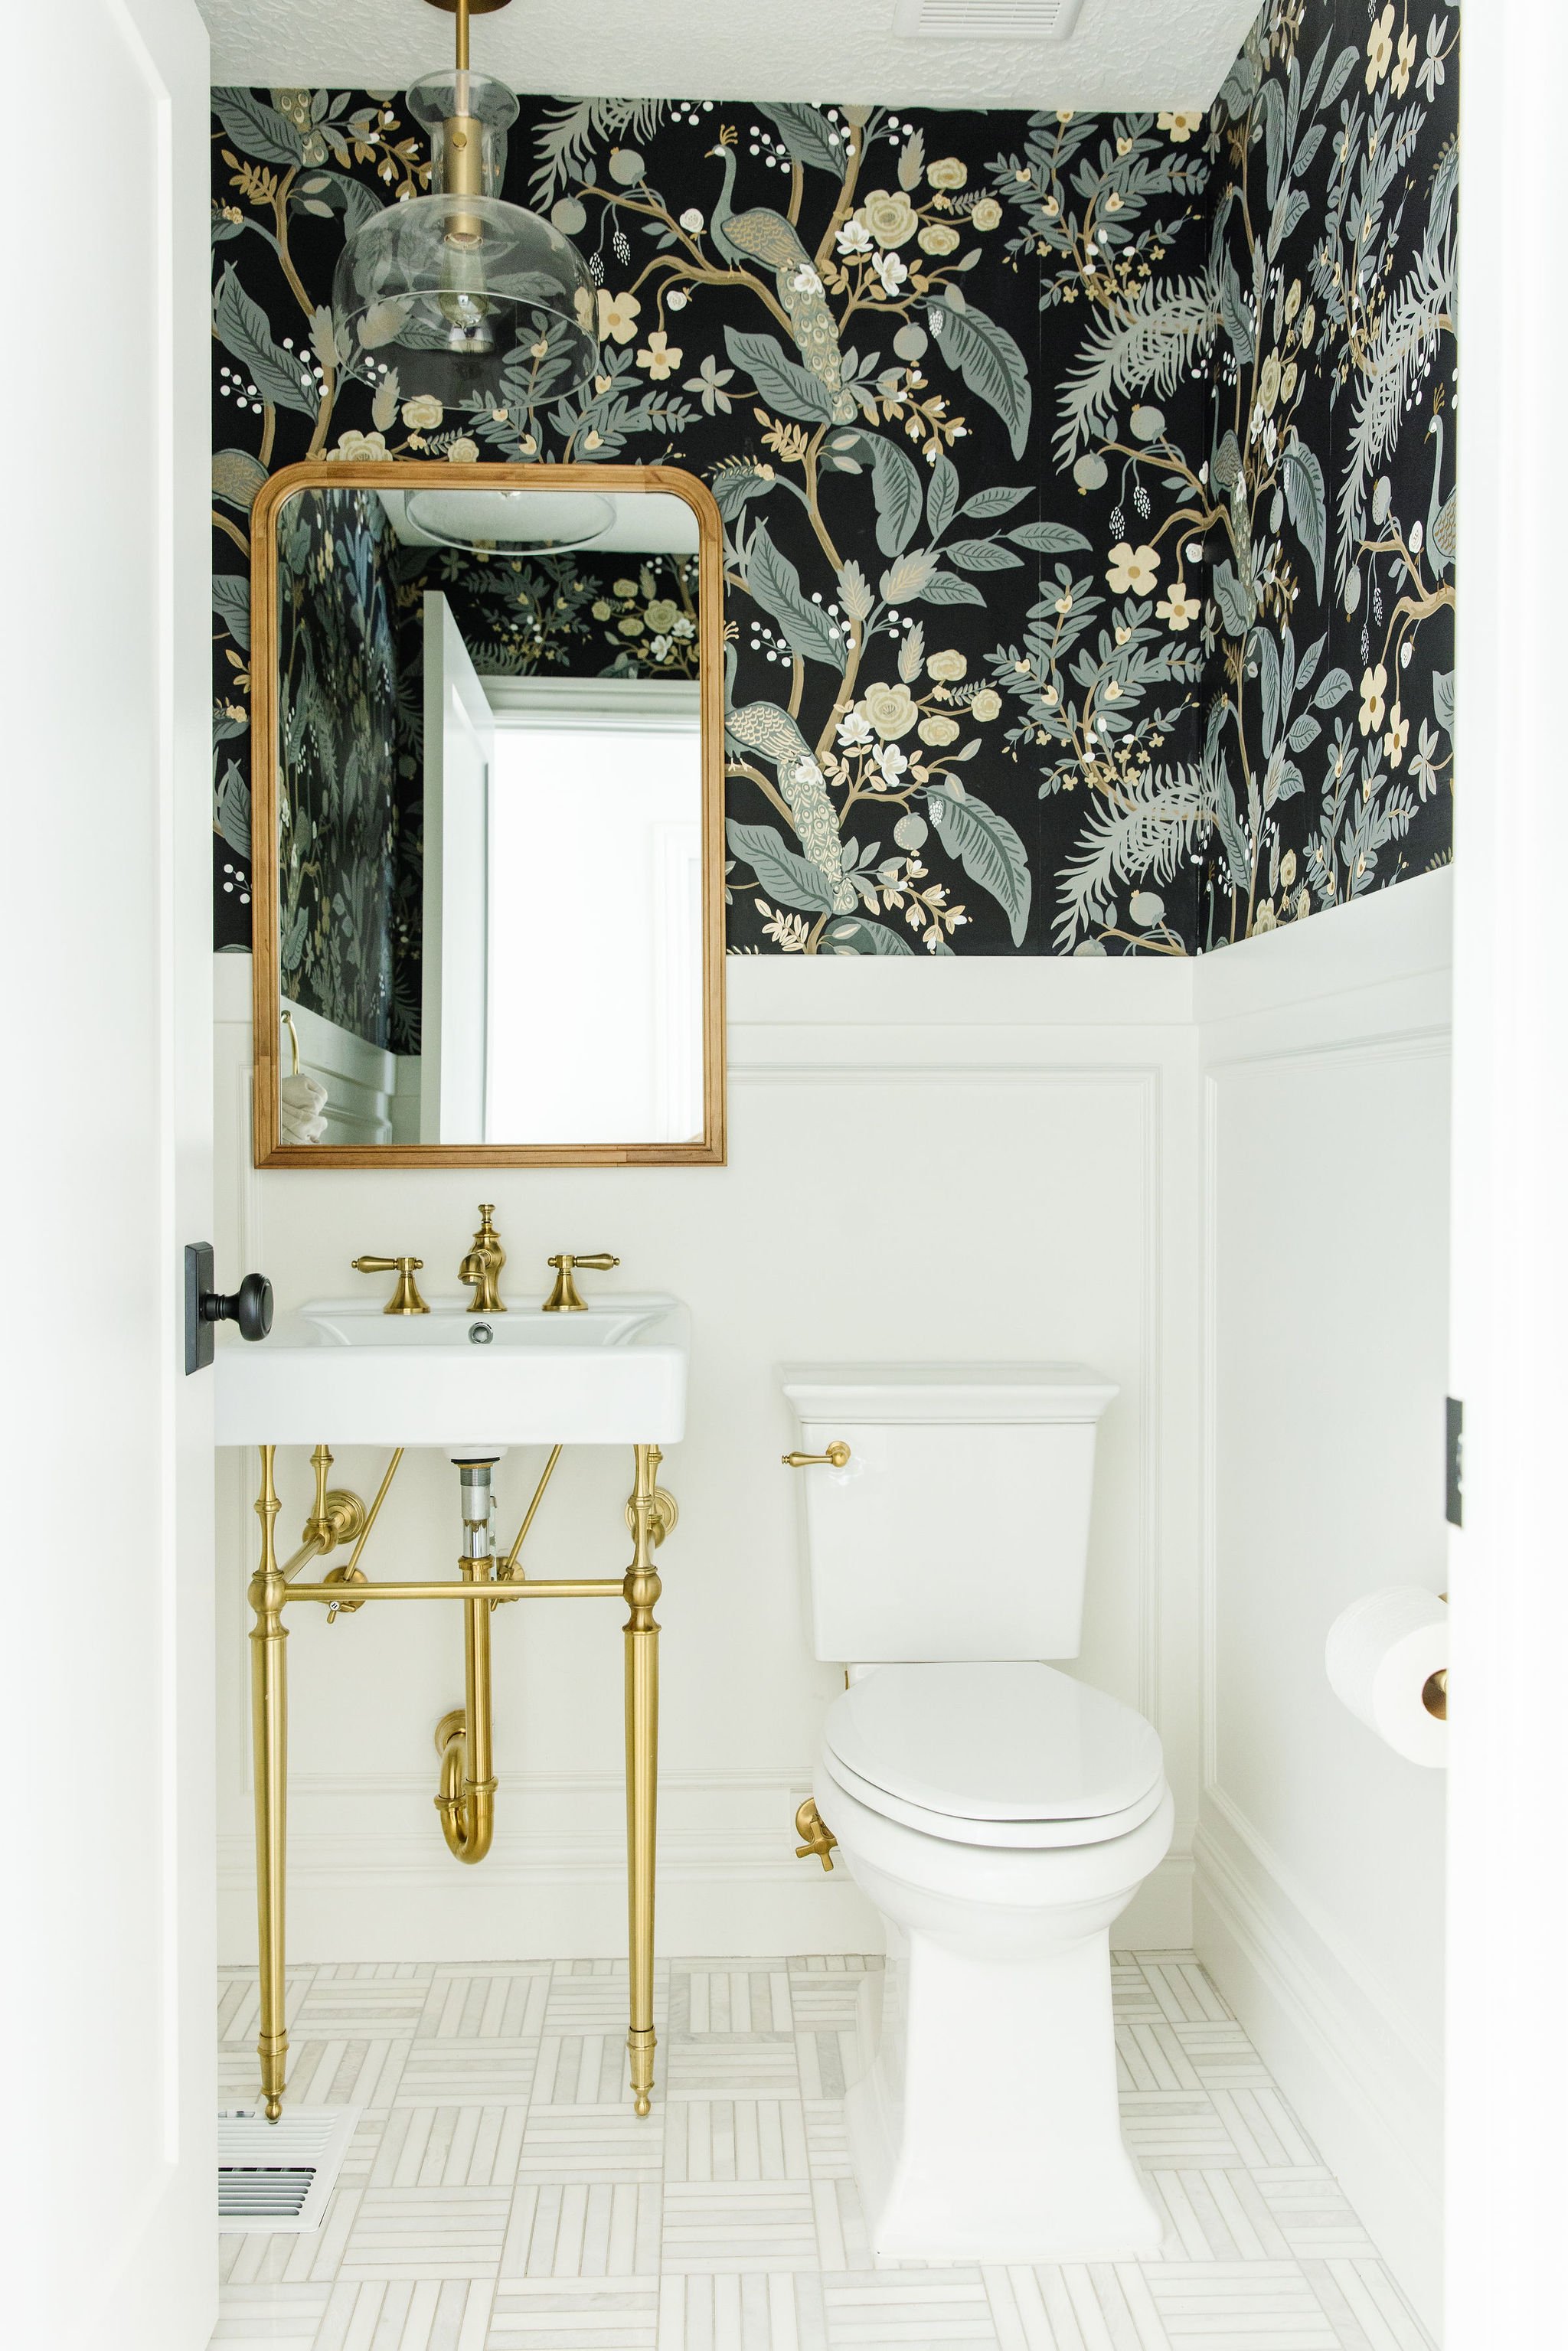  Liz Powell combined vibrant wallpaper with peaceful wainscotting to enhance the effect of this small power bathroom. Small space color gold bath figures and pipes patterned tile #bathroomwallpaper #smallbathroom #blackandgreenwallpaper #exposedpipes